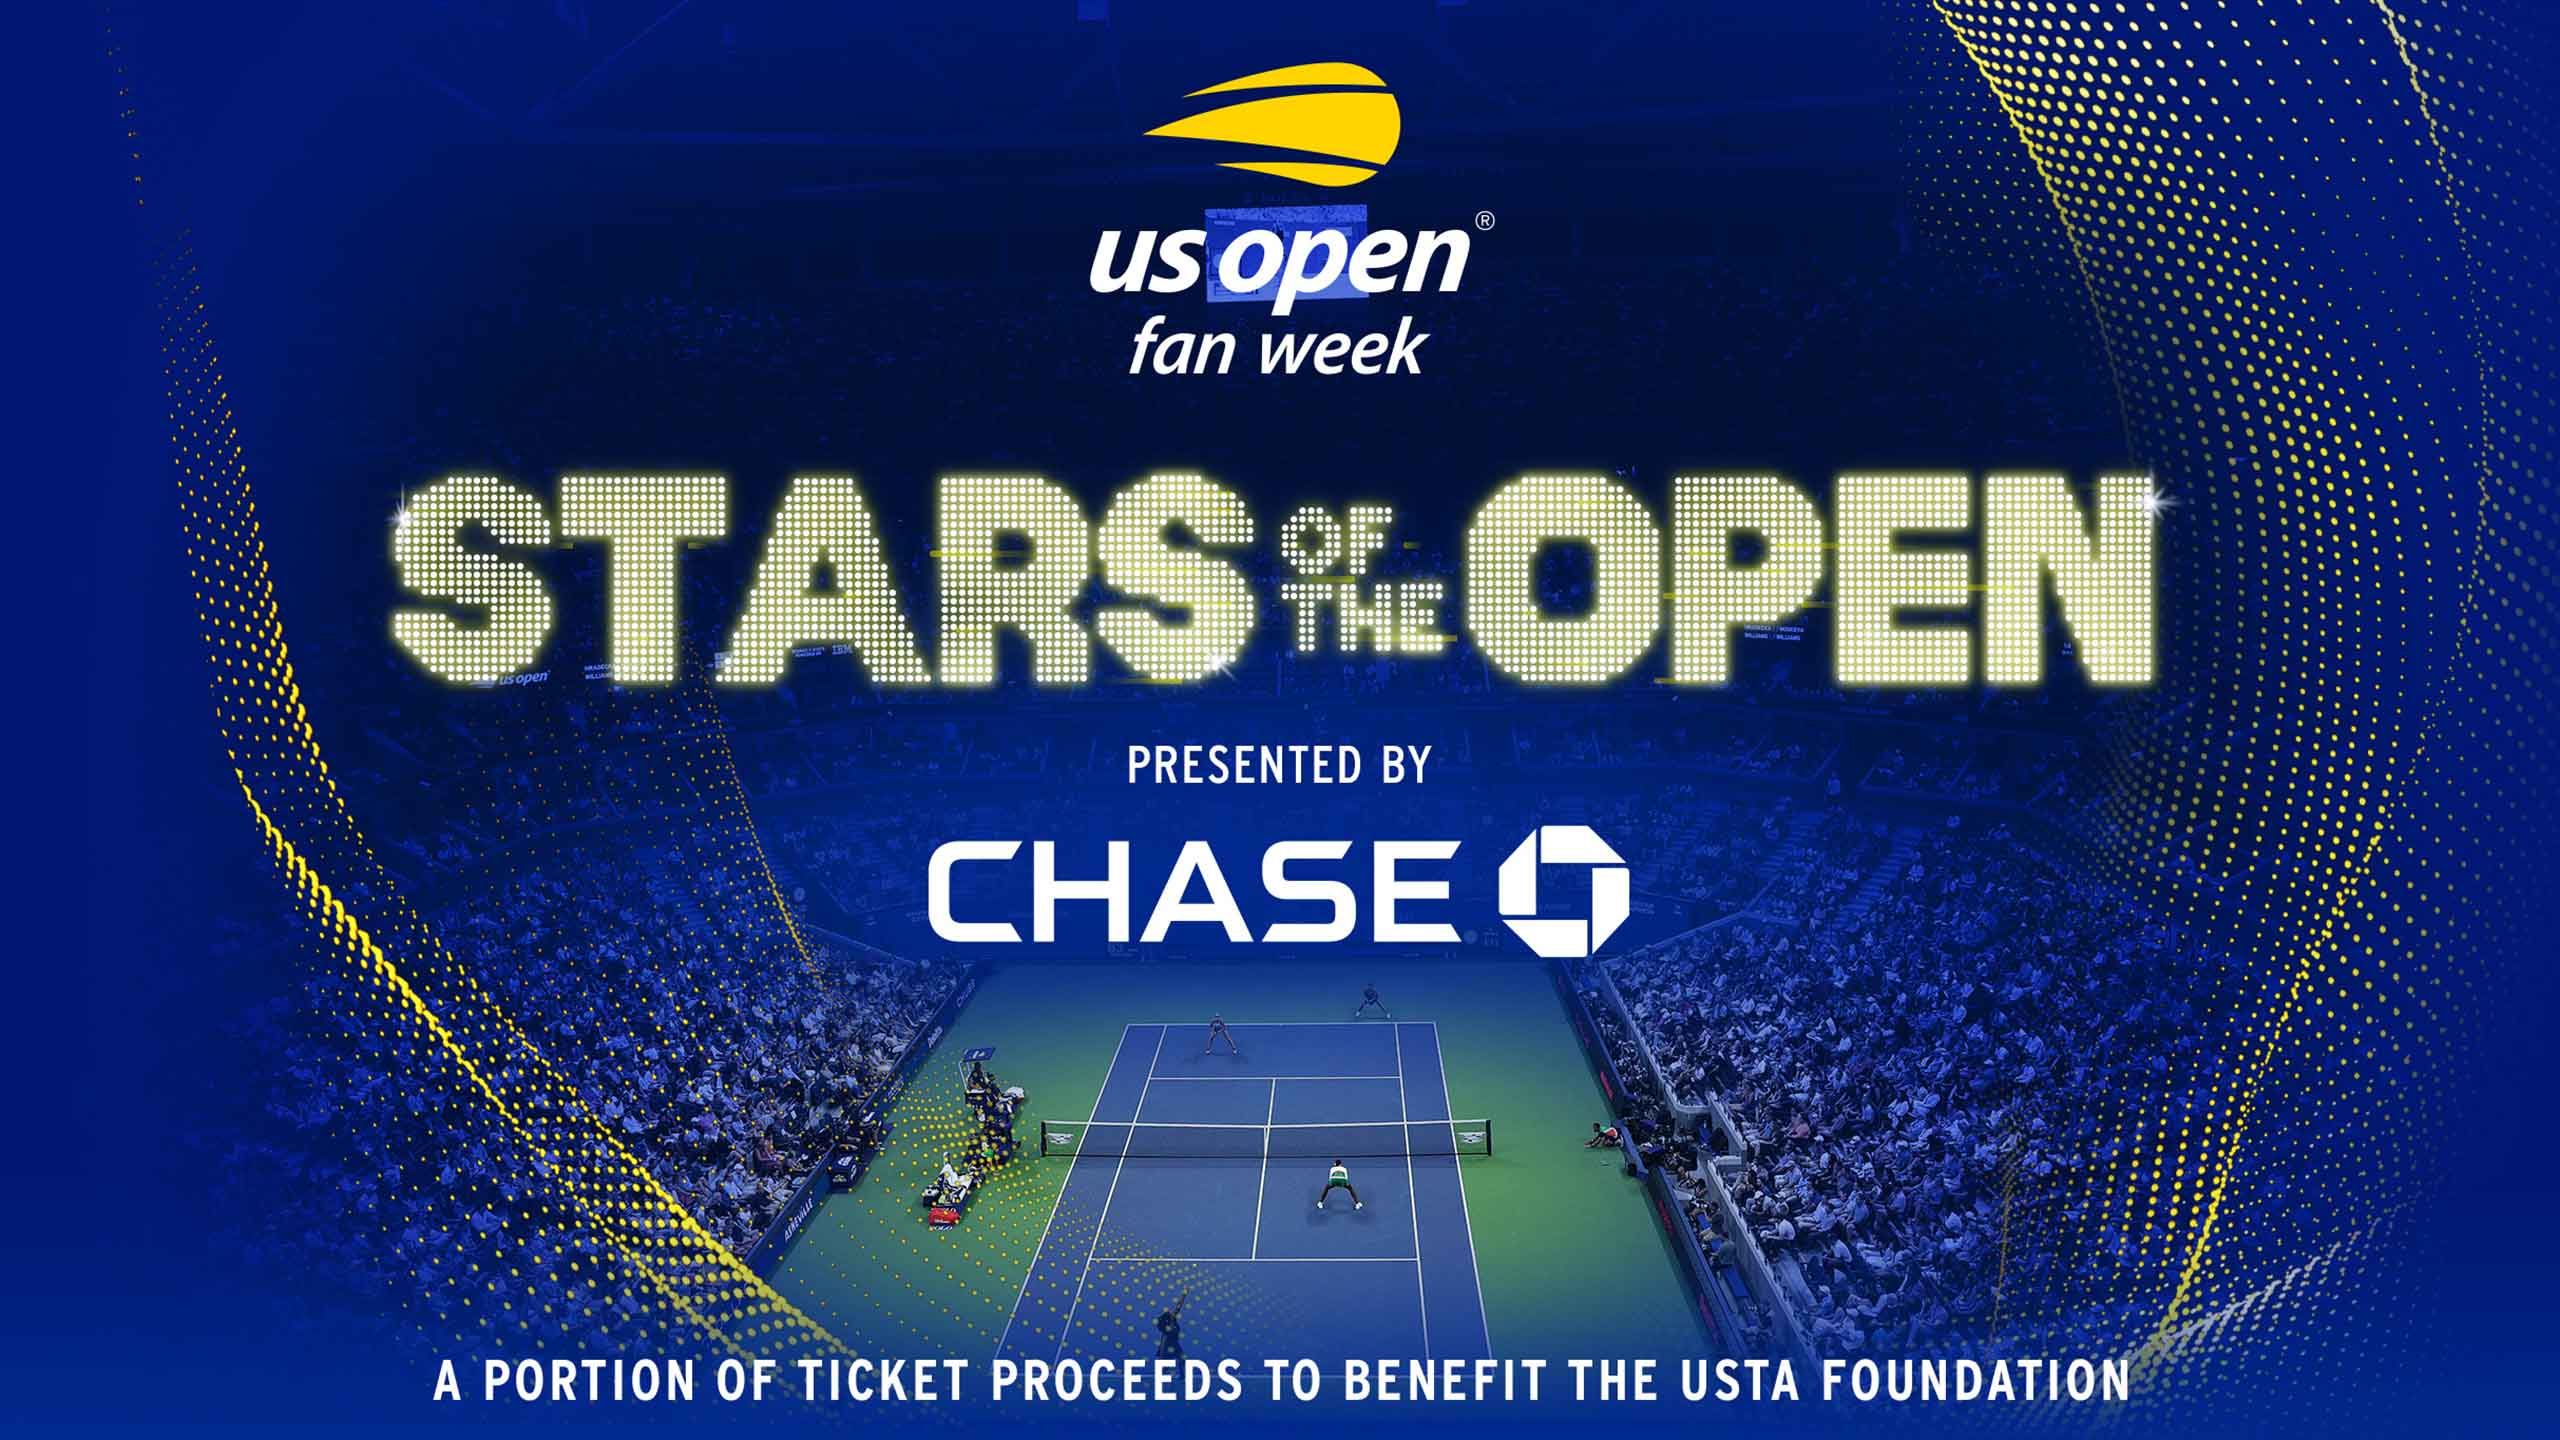 US Open fan week Stars of the Open, Presented by Chase. A portion of ticket proceeds to benefit the USTA Foundation